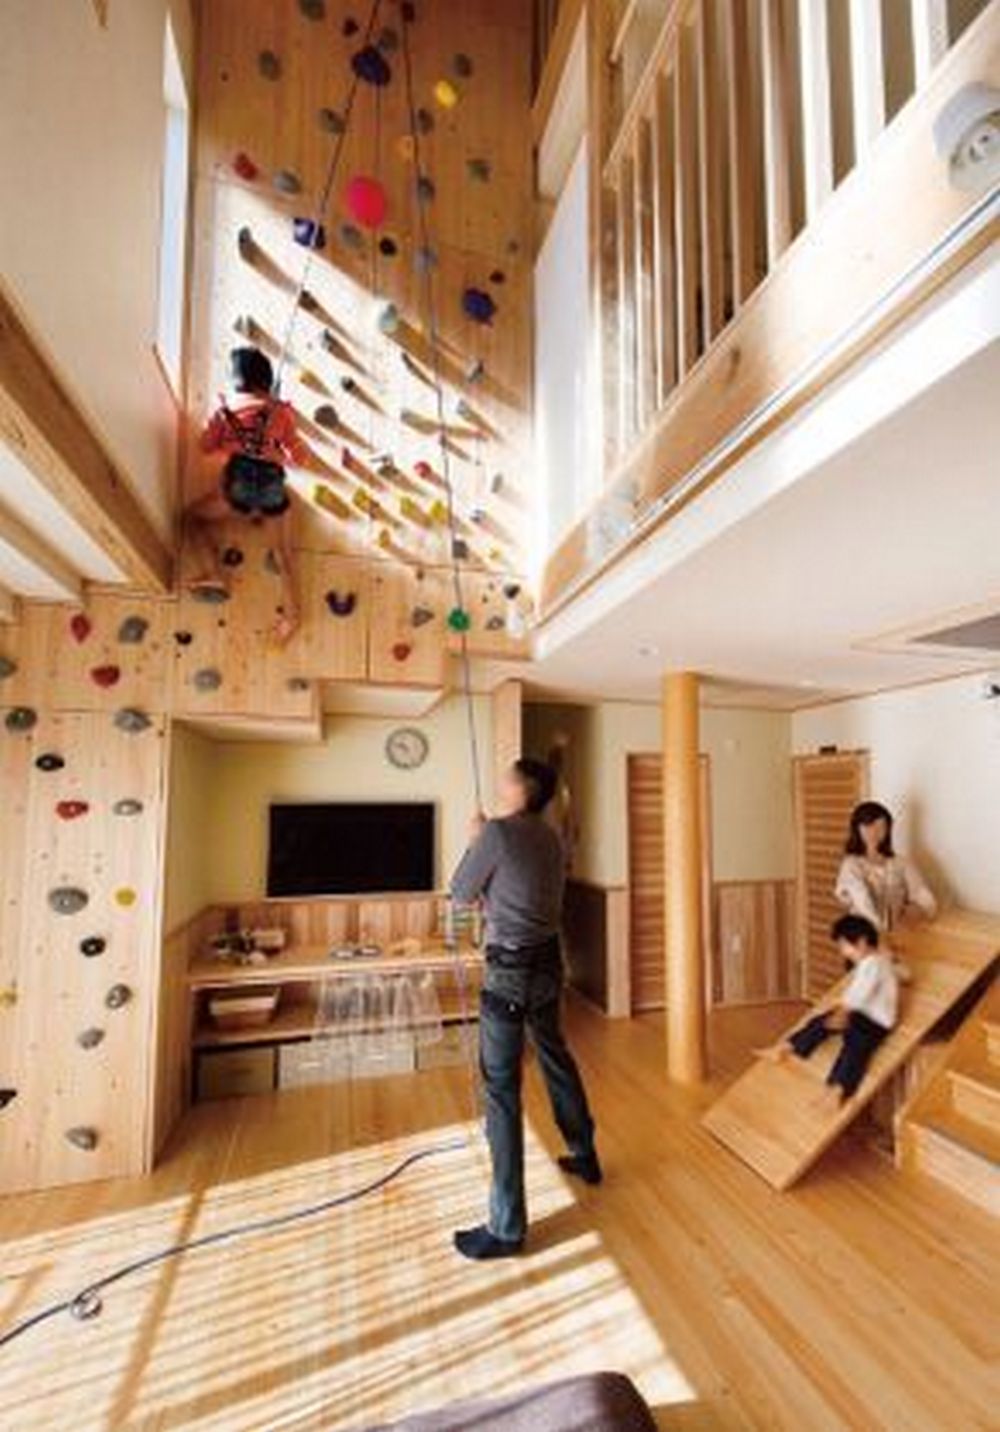 Creative Indoor Climbing Wall - Your Projects@OBN